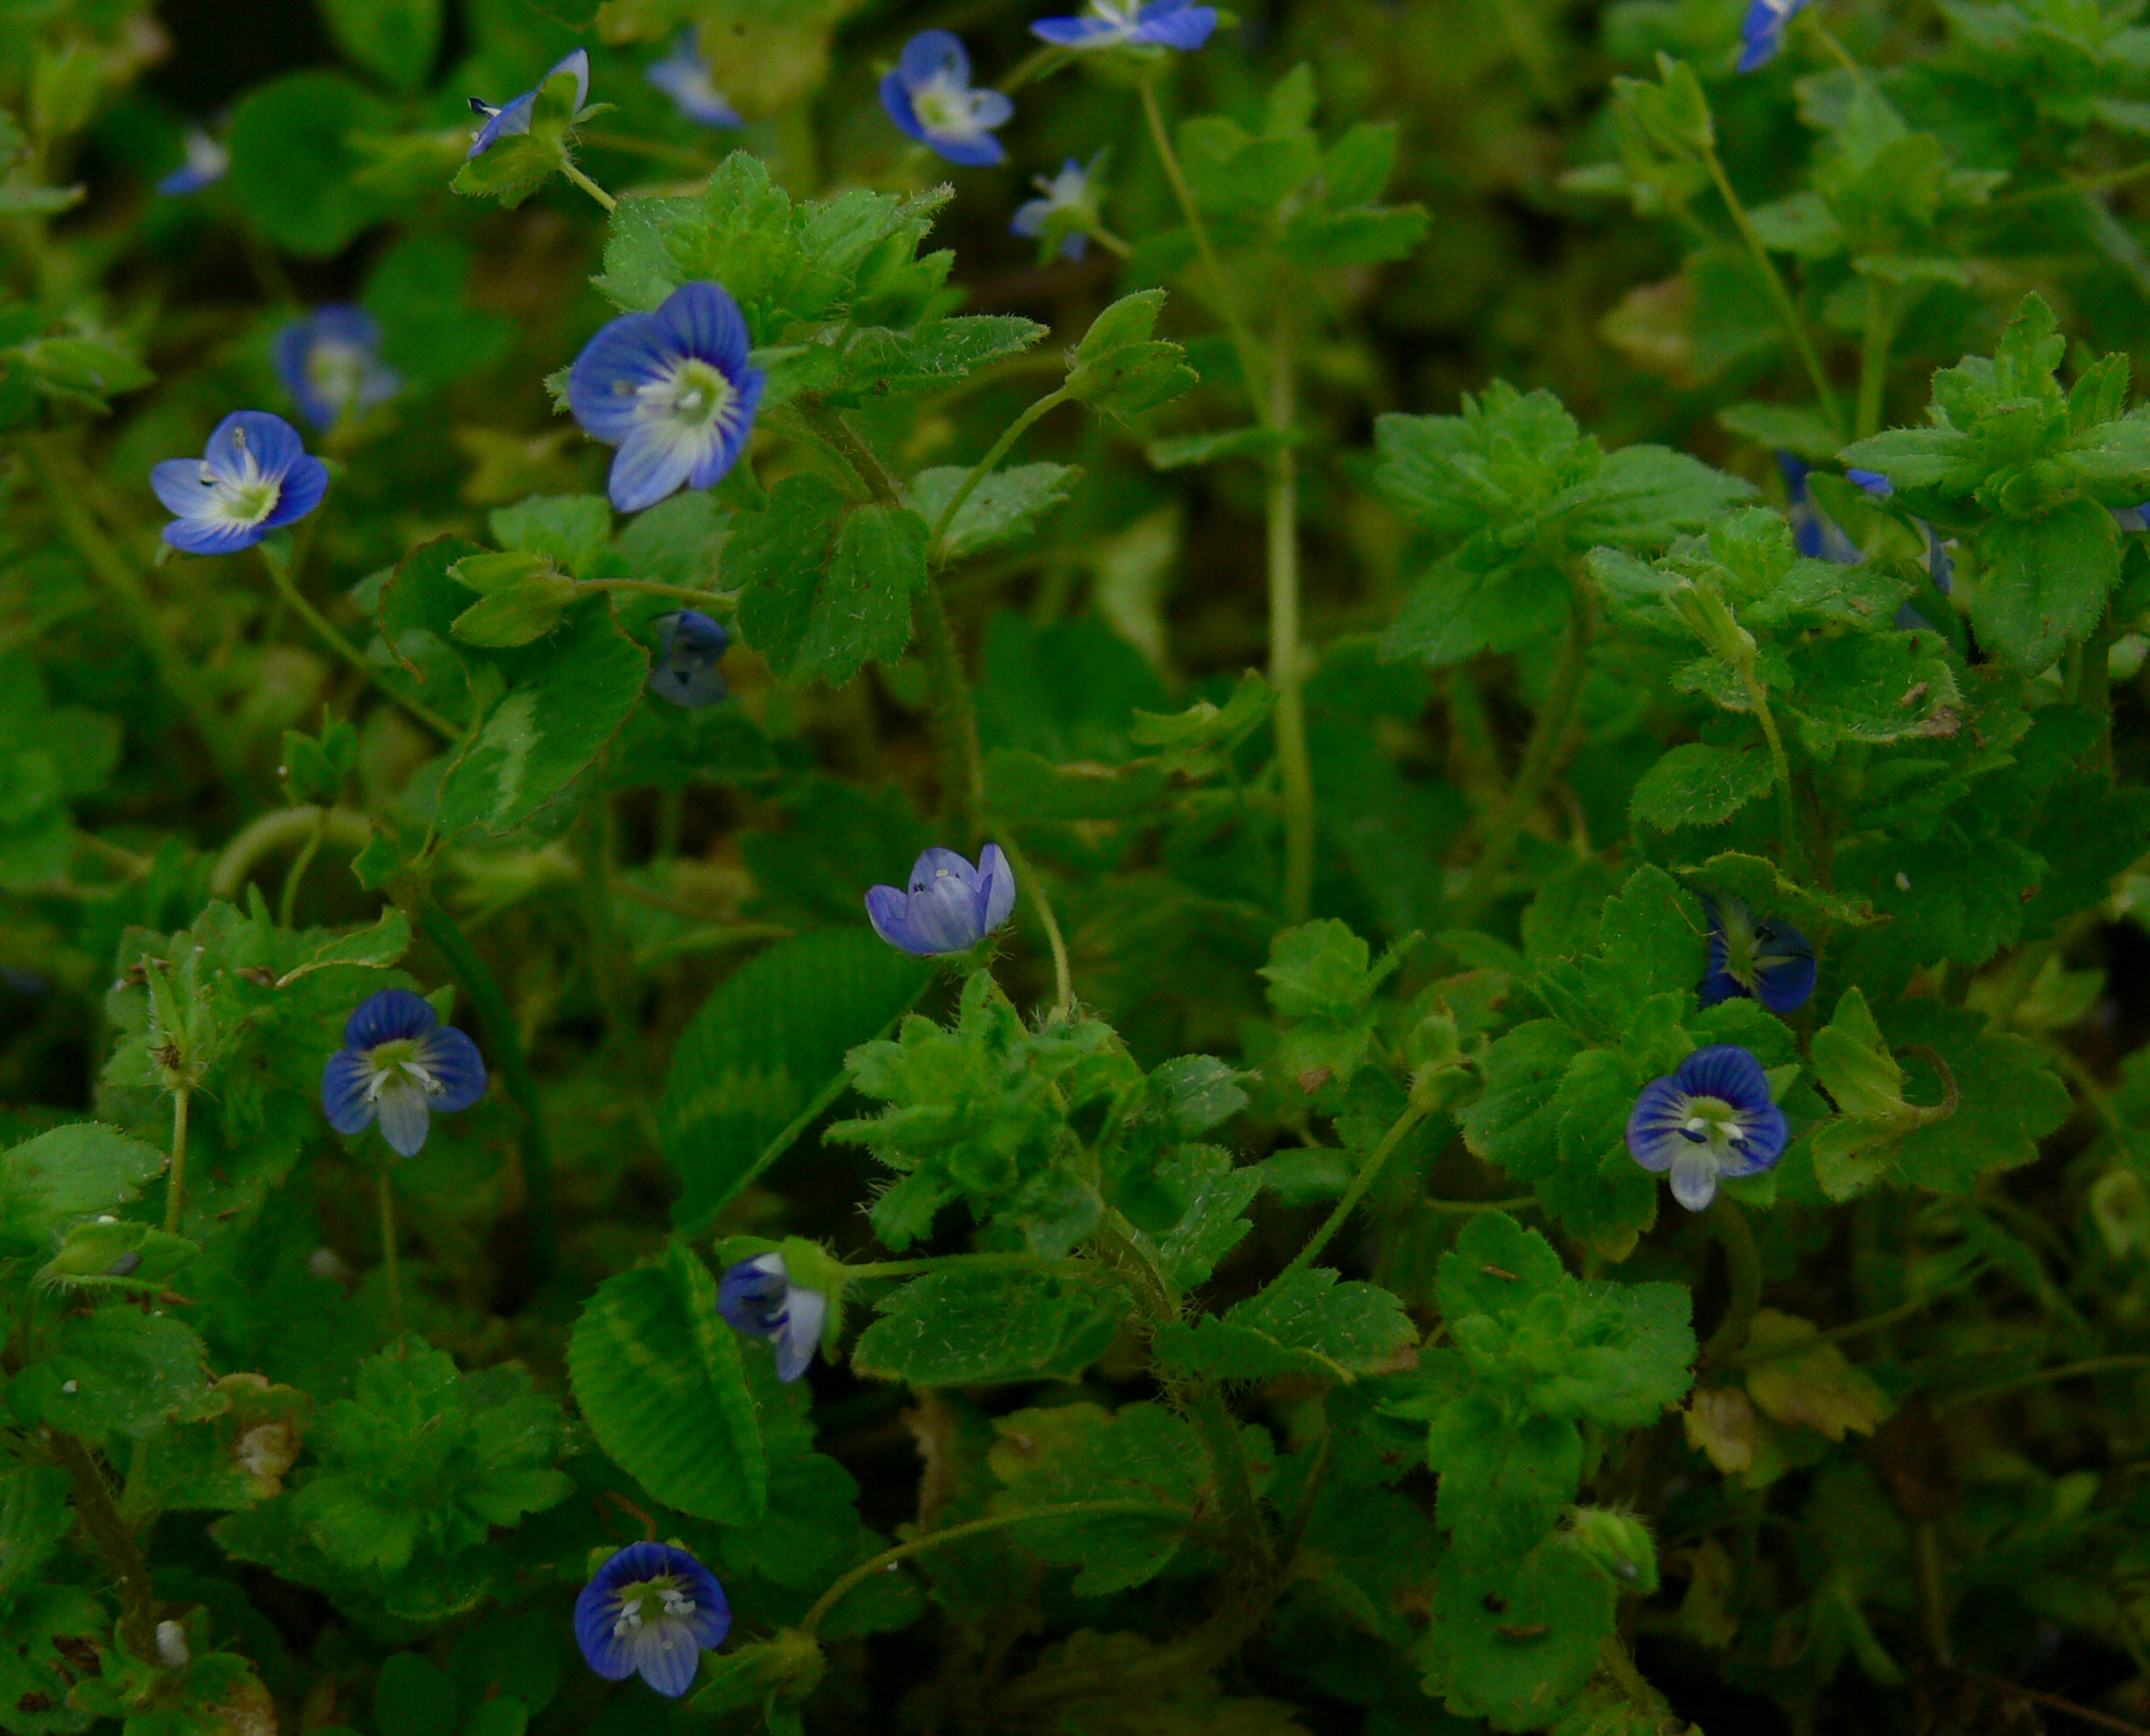 A close-up showing the numerous blue flowers along with hairy leaves with toothed